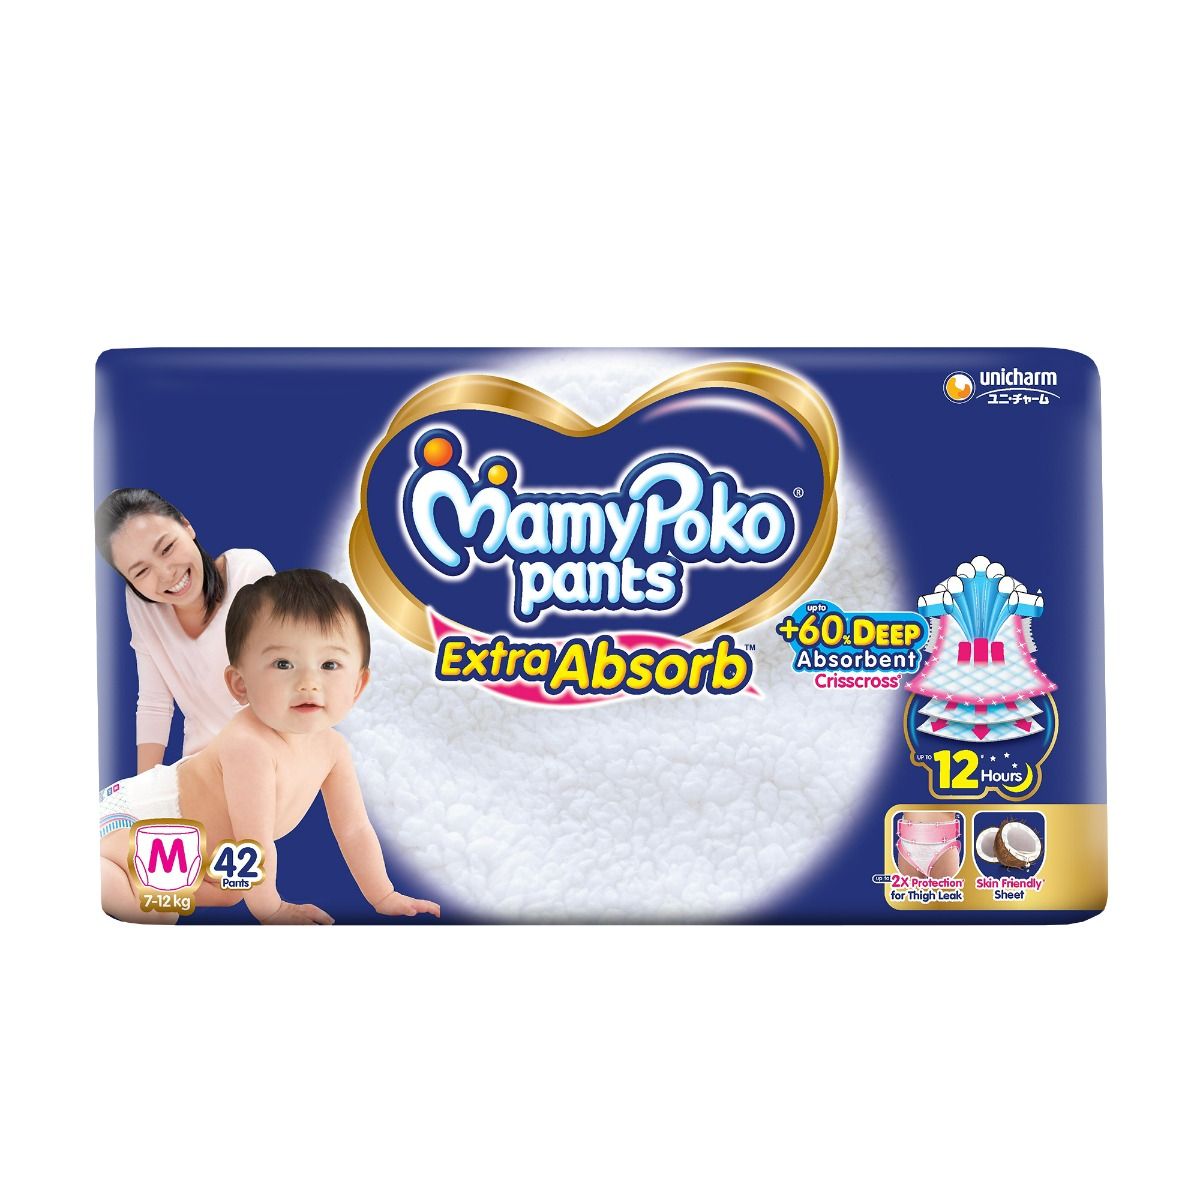 Buy Mamypoko Pants Standard Diaper - Large, 9-14 Kg 34 pcs Pouch Online at  Best Price. of Rs 399 - bigbasket